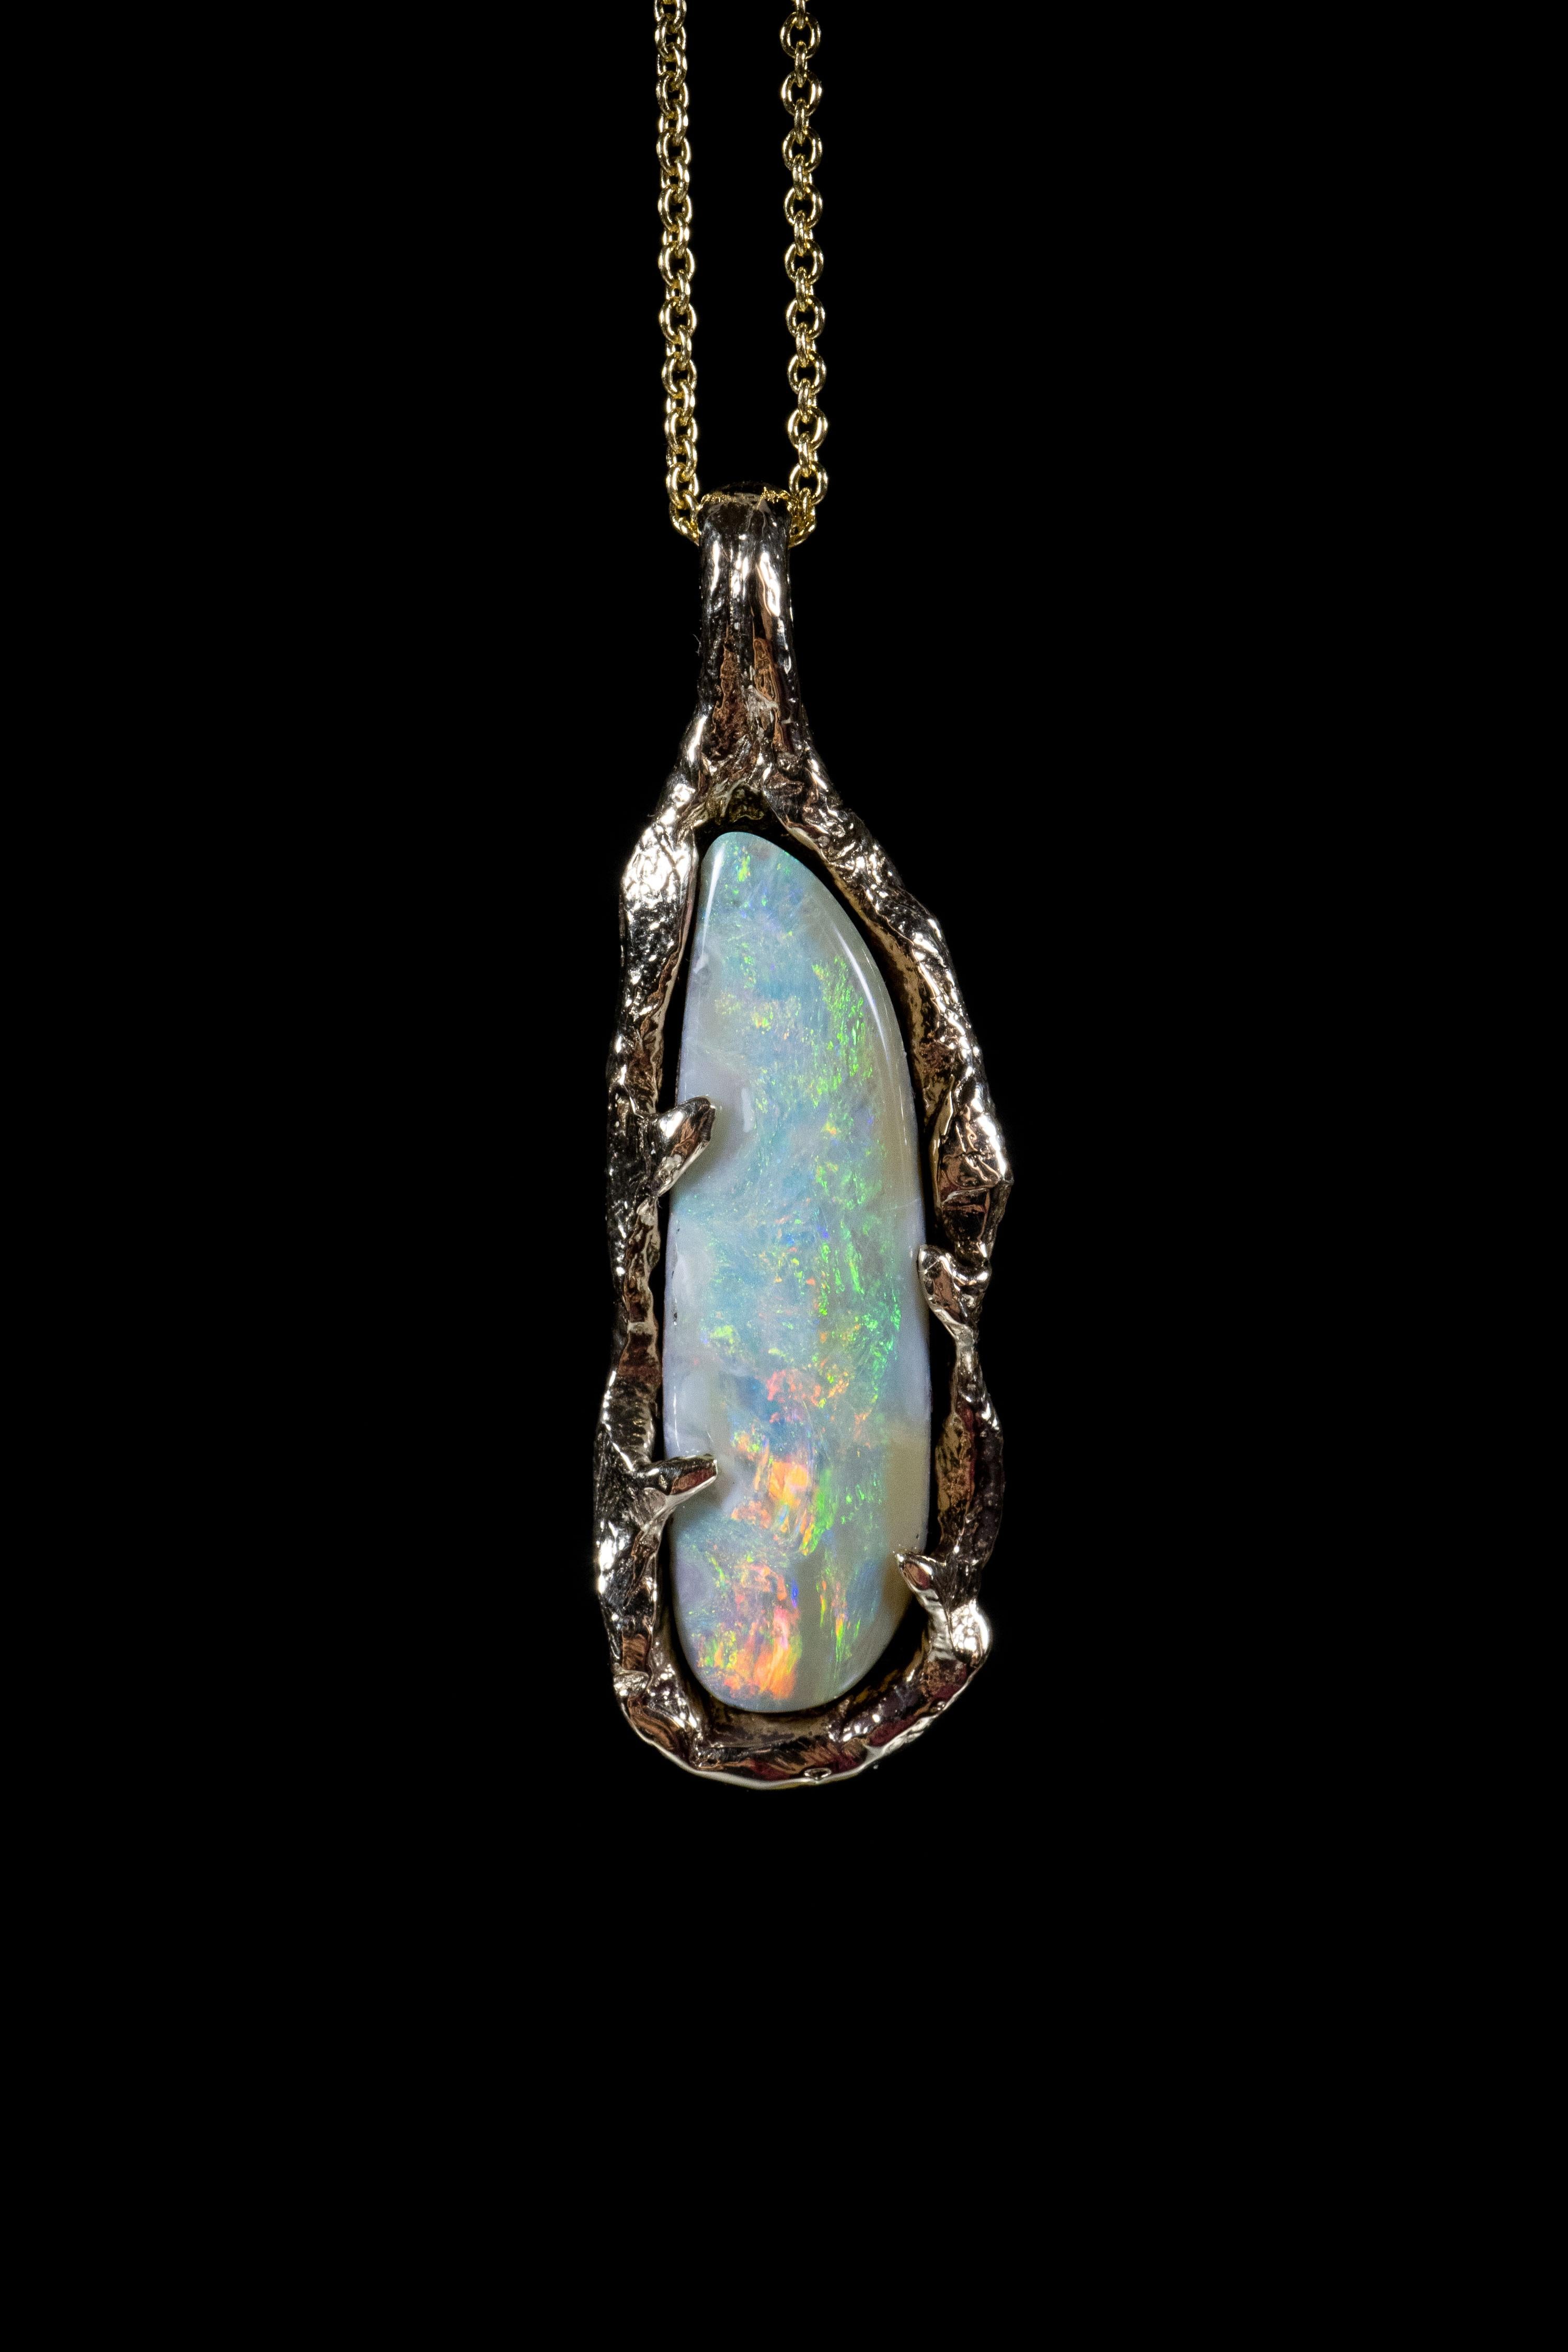 Opal World no. 3 is a one-of-a-kind pendant by Ken Fury that is hand-carved and cast in 14K solid yellow gold and features a stunning genuine Australian boulder opal. The gold entangles the stone like a vine, holding onto it, protecting its light.